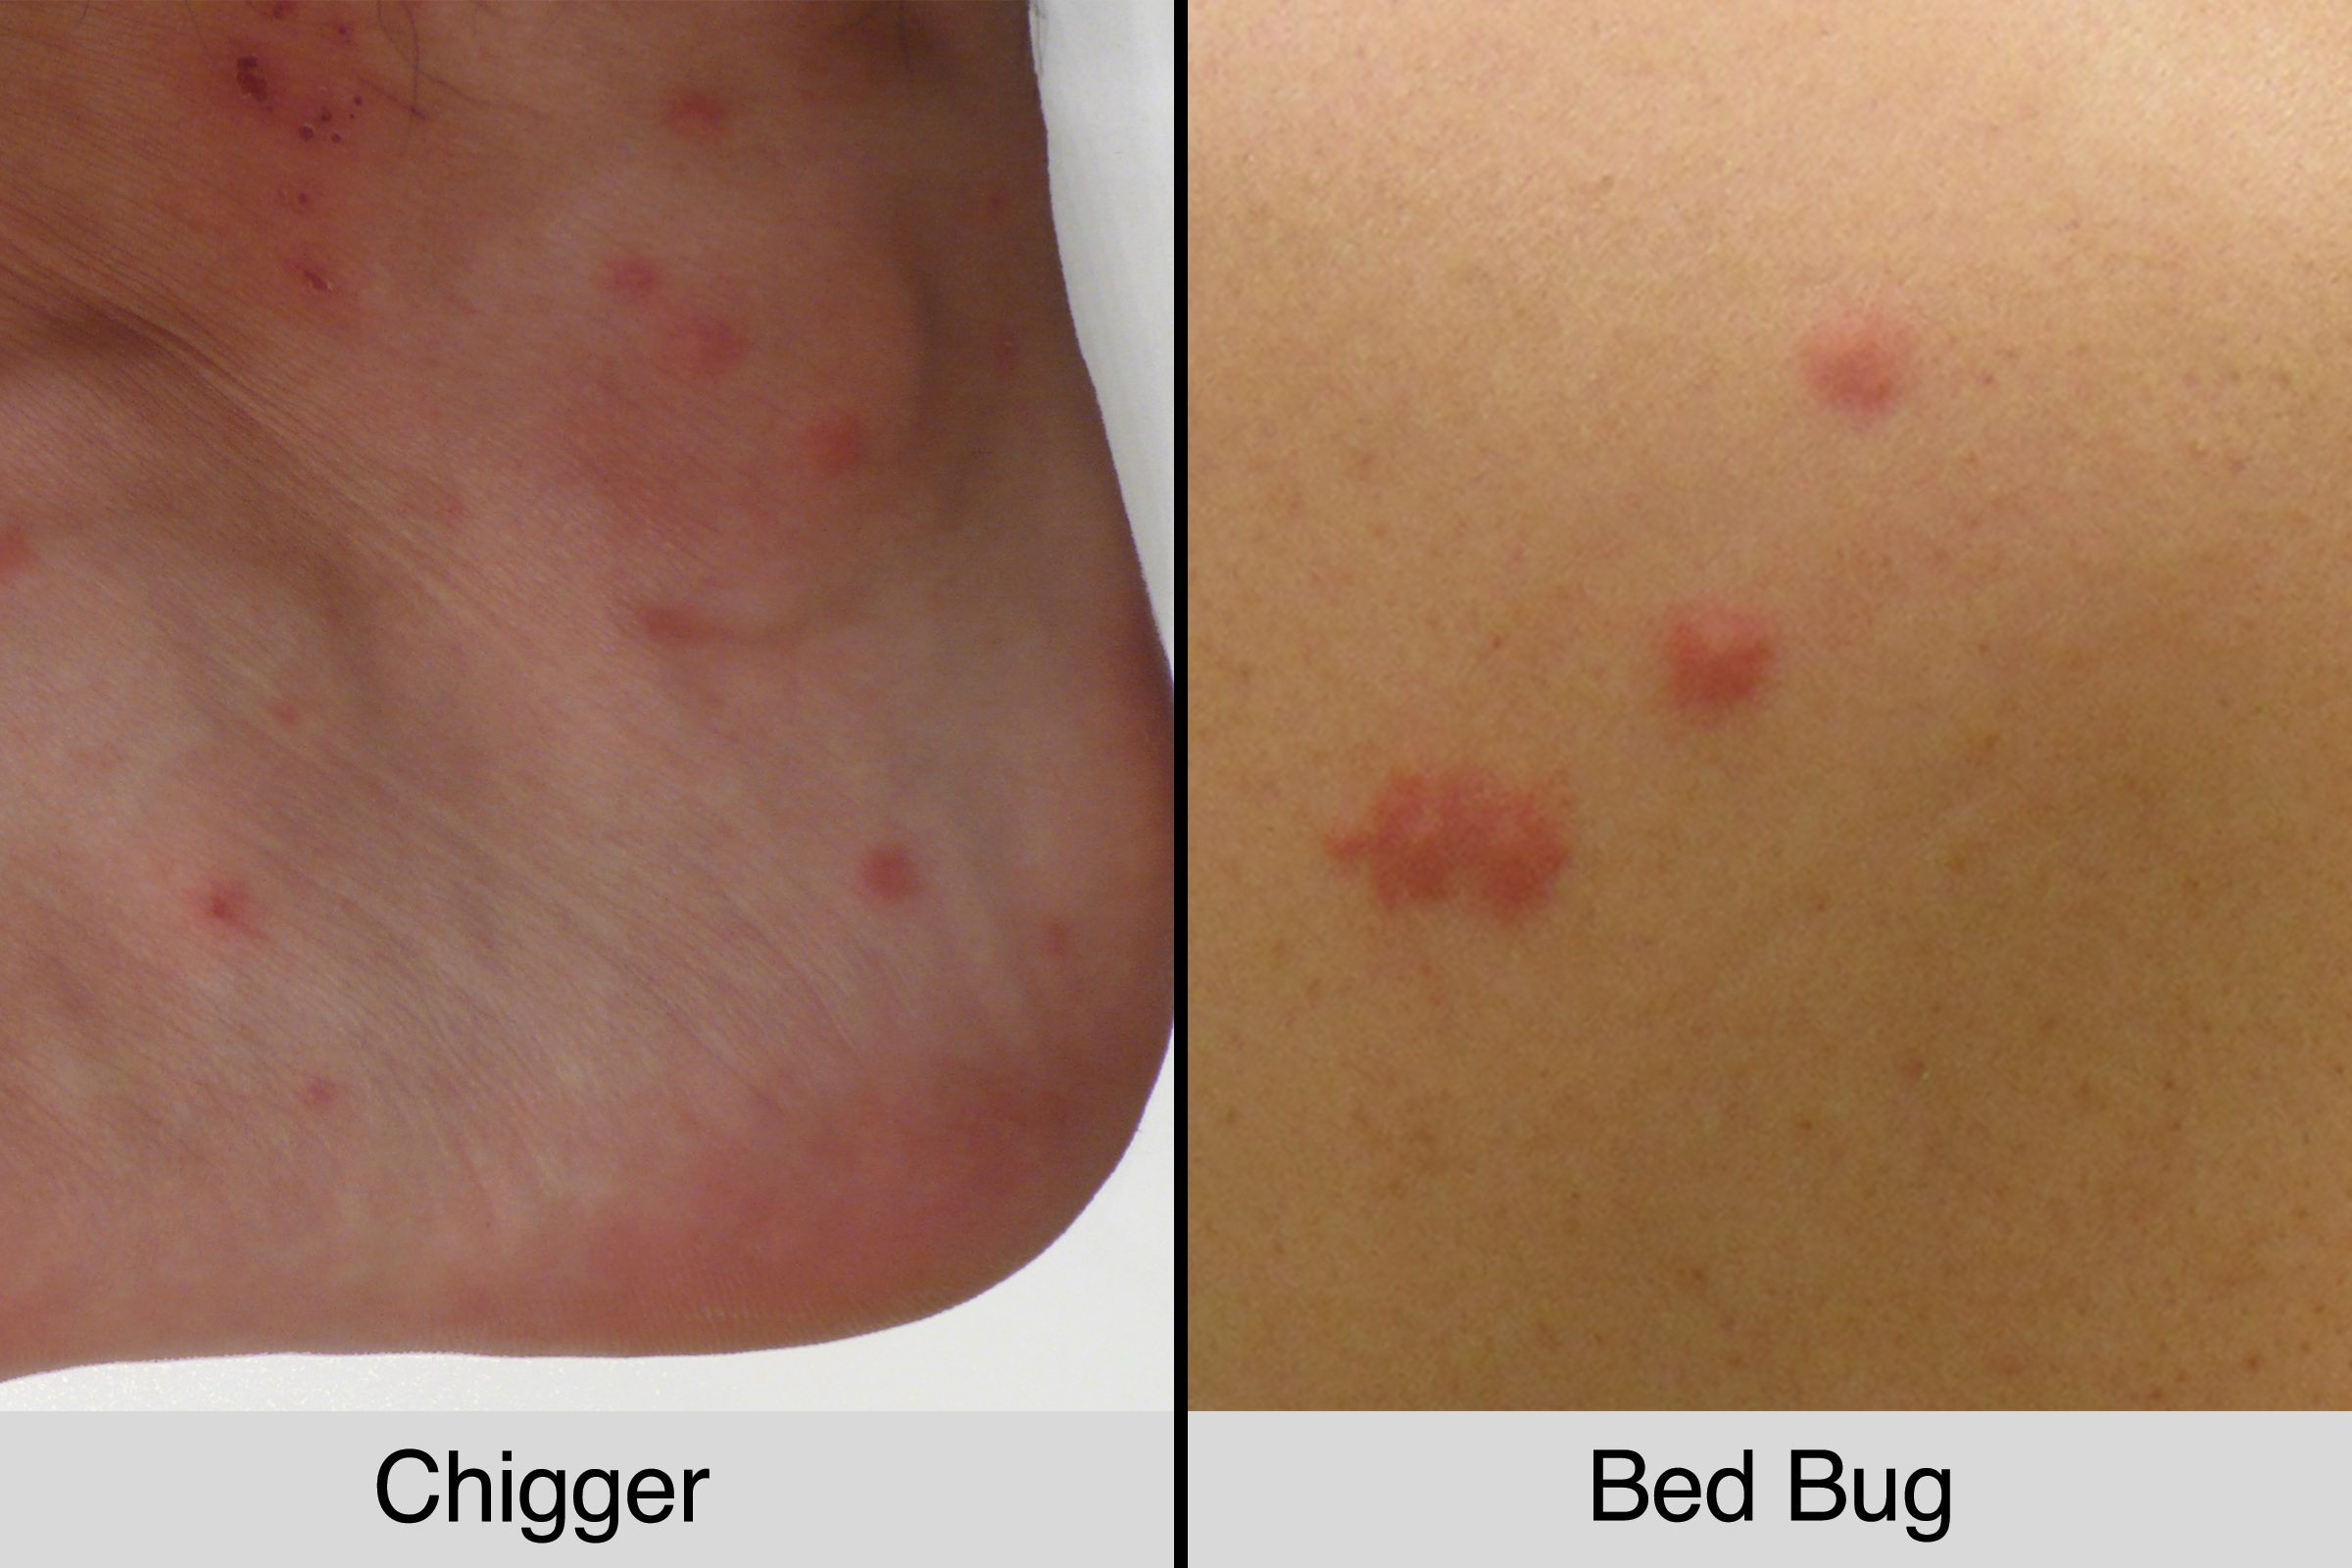 Bites but No Signs of Bed Bugs: How to Identify Bedbug Bites